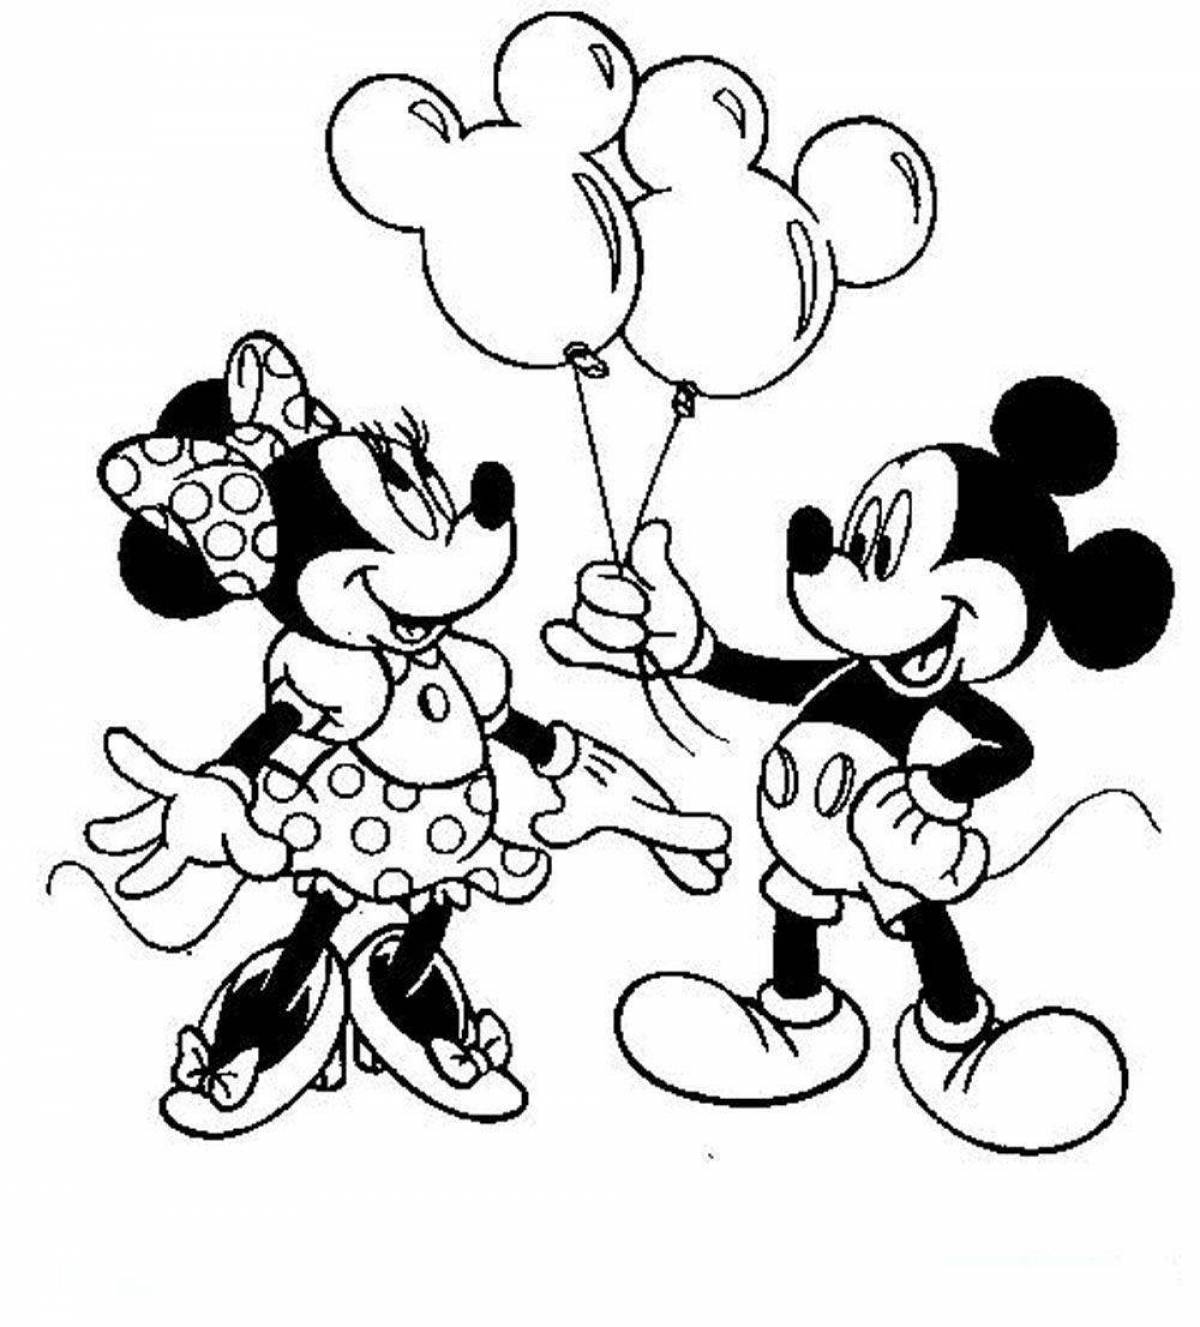 Coloring smart mickey mouse